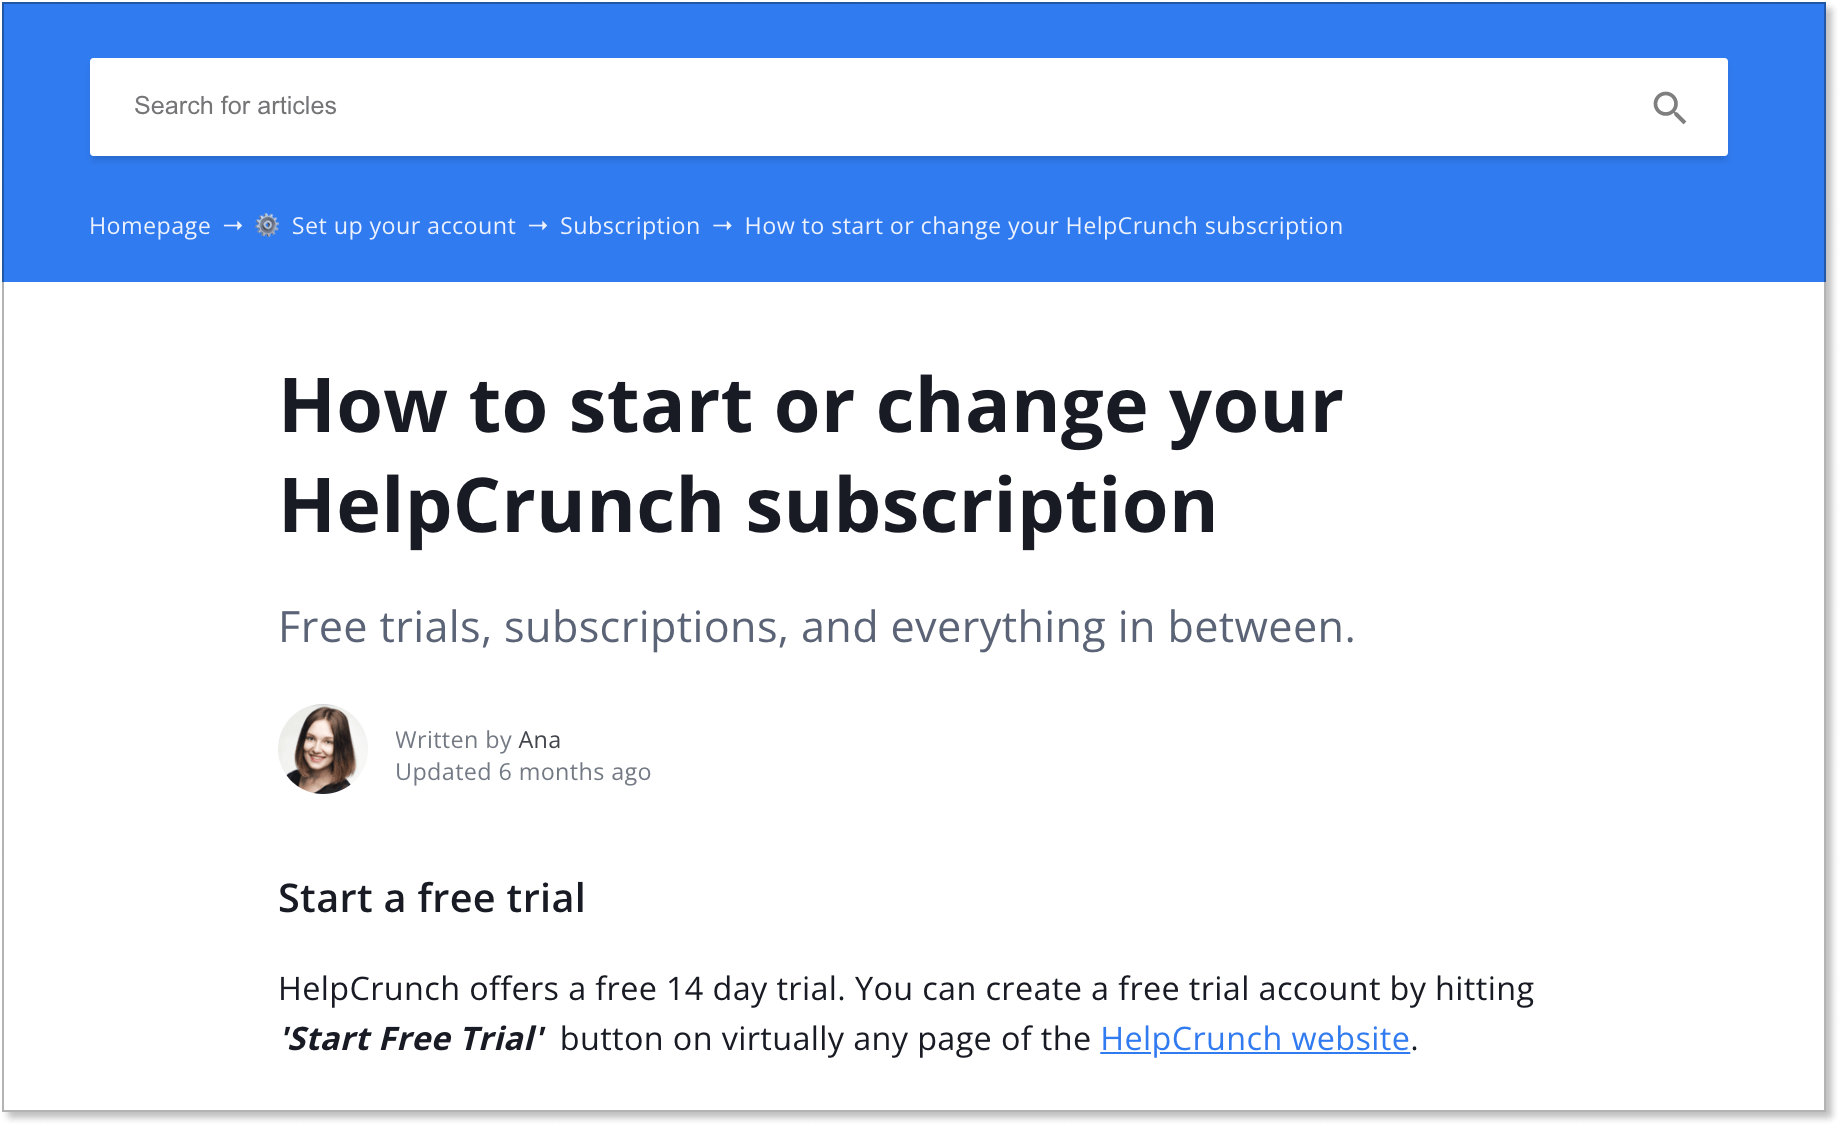 HelpCrunch is set up for knowledge base SEO with internal links in its help articles